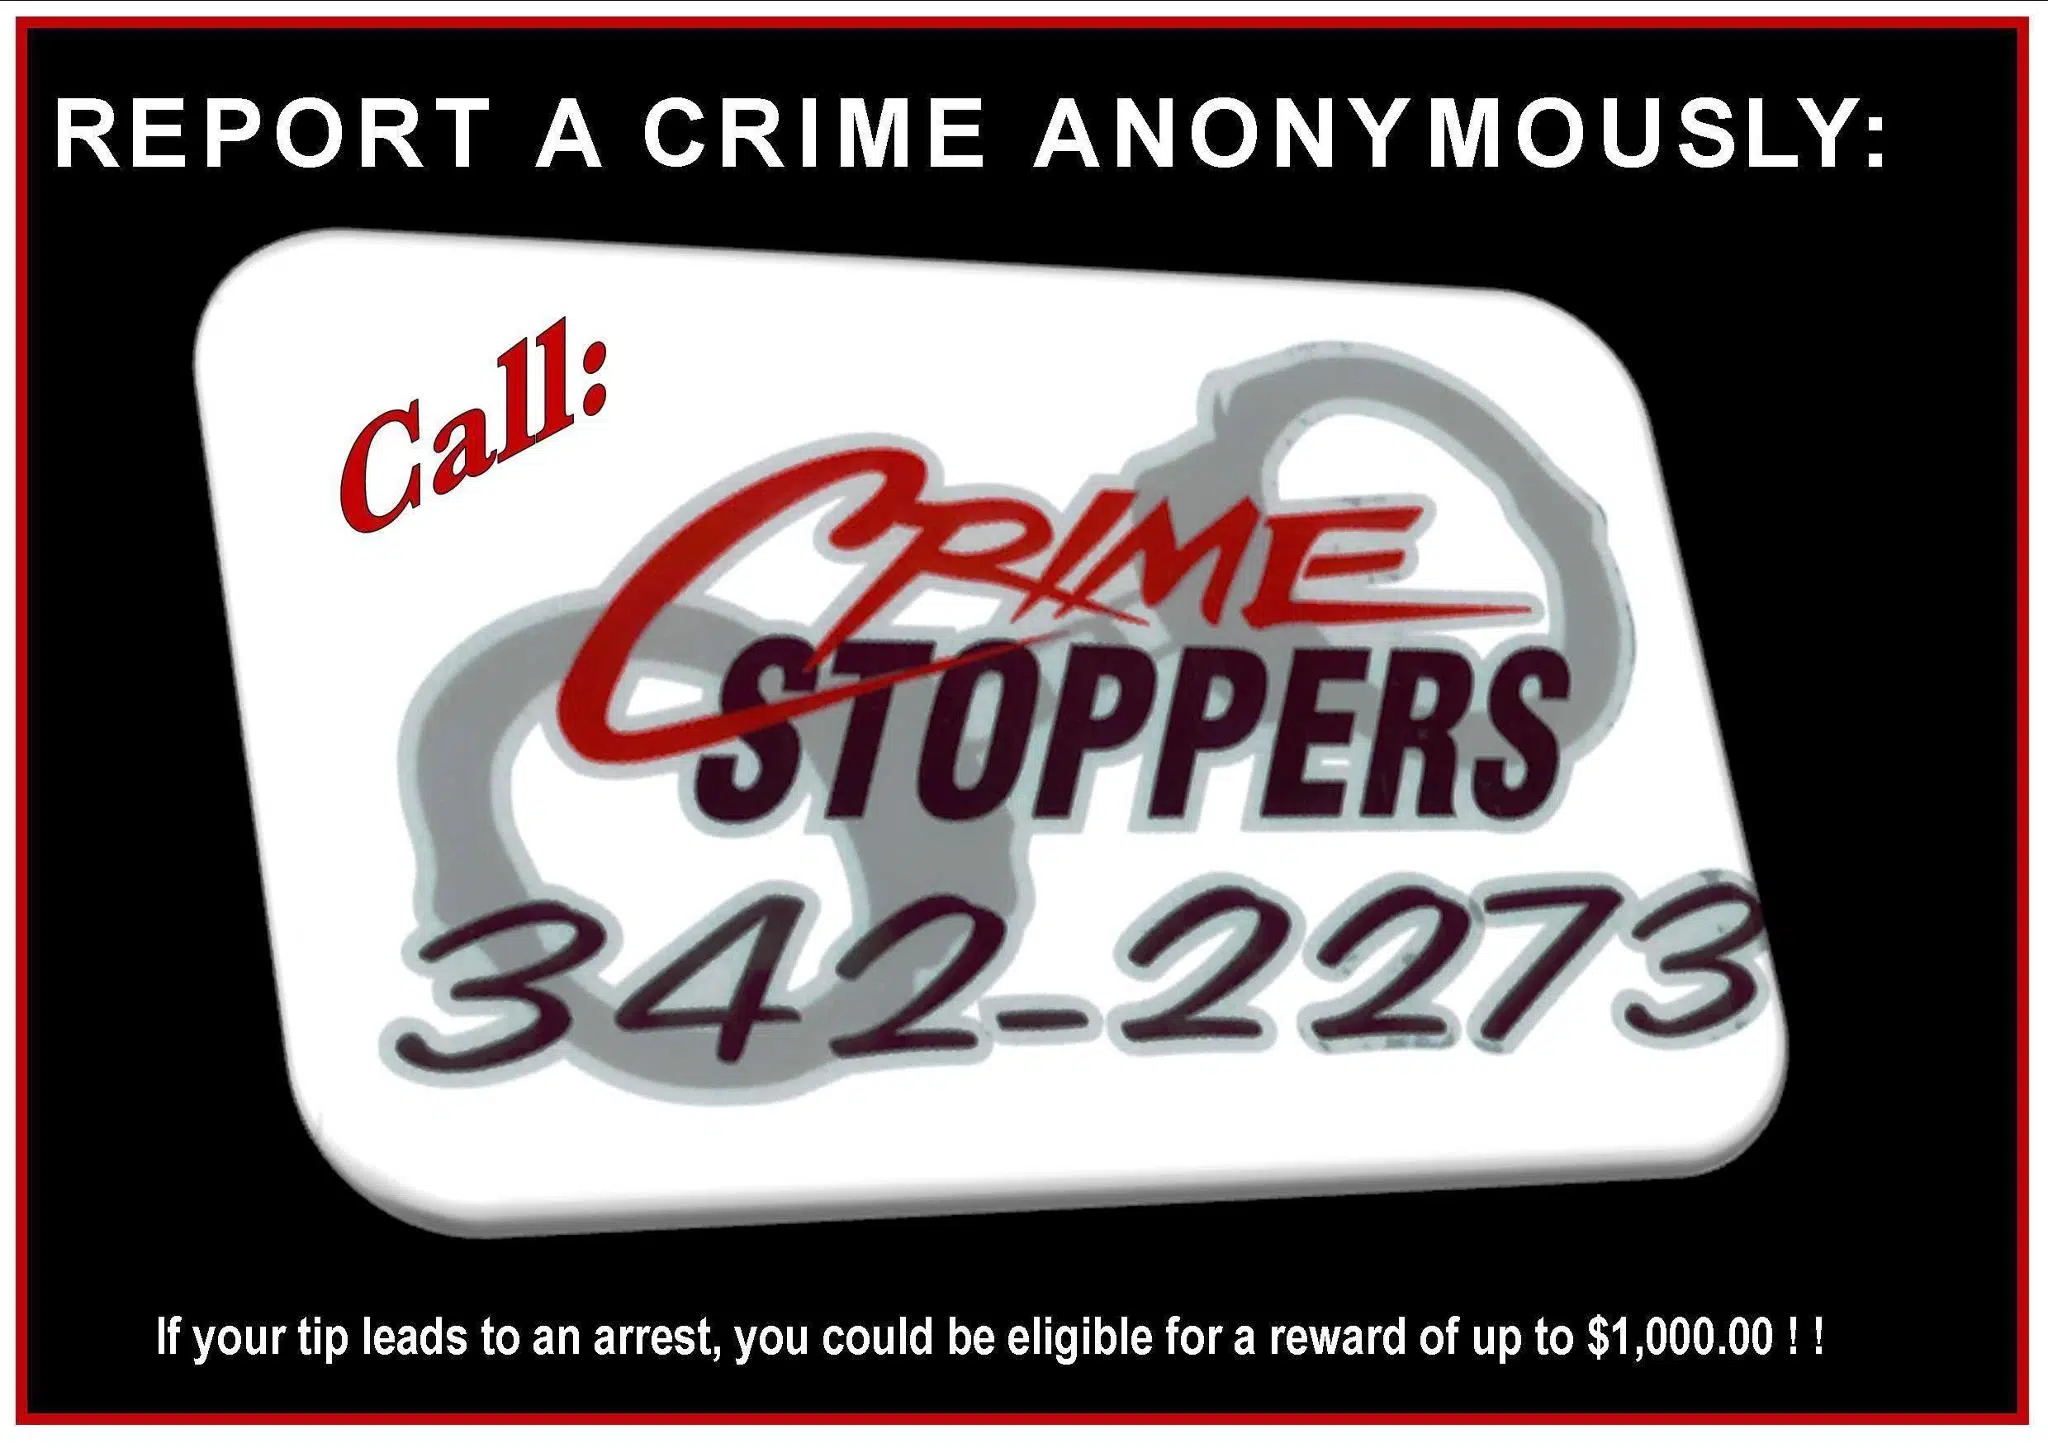 Crime Stoppers encourages residents to attend Tuesday meet-and-greet